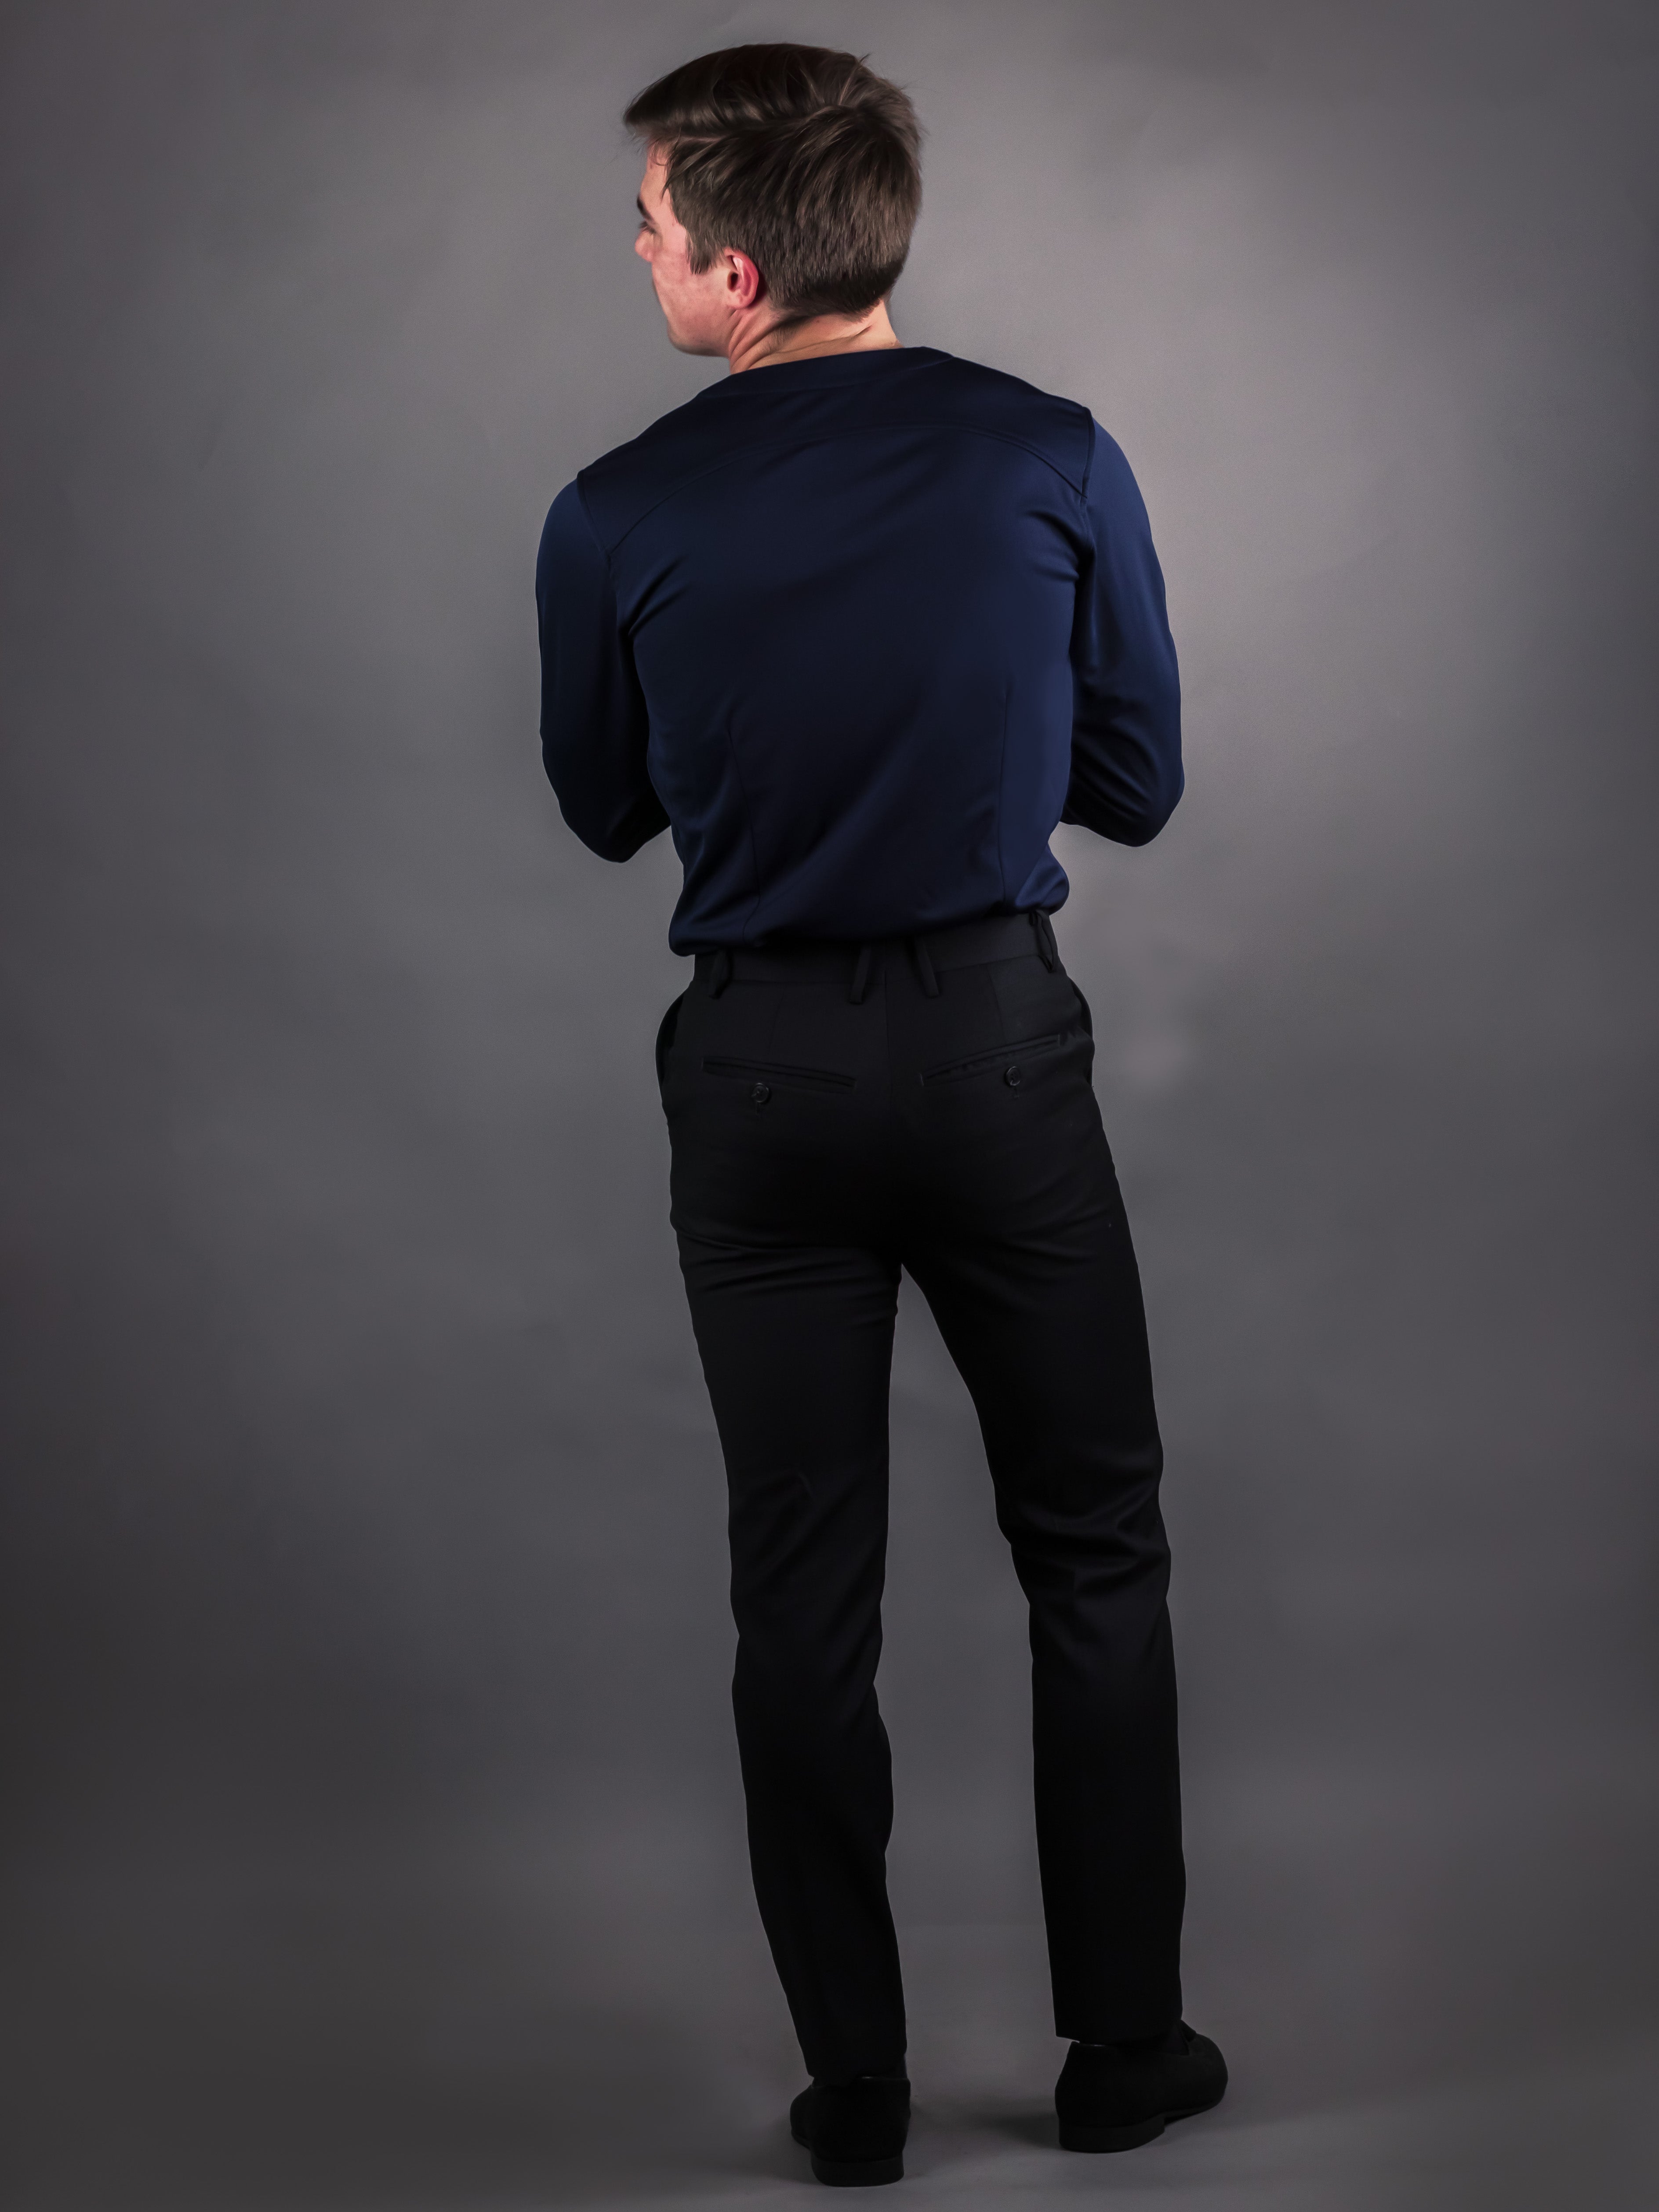 Model wearing designer mens shirt with a collarless style